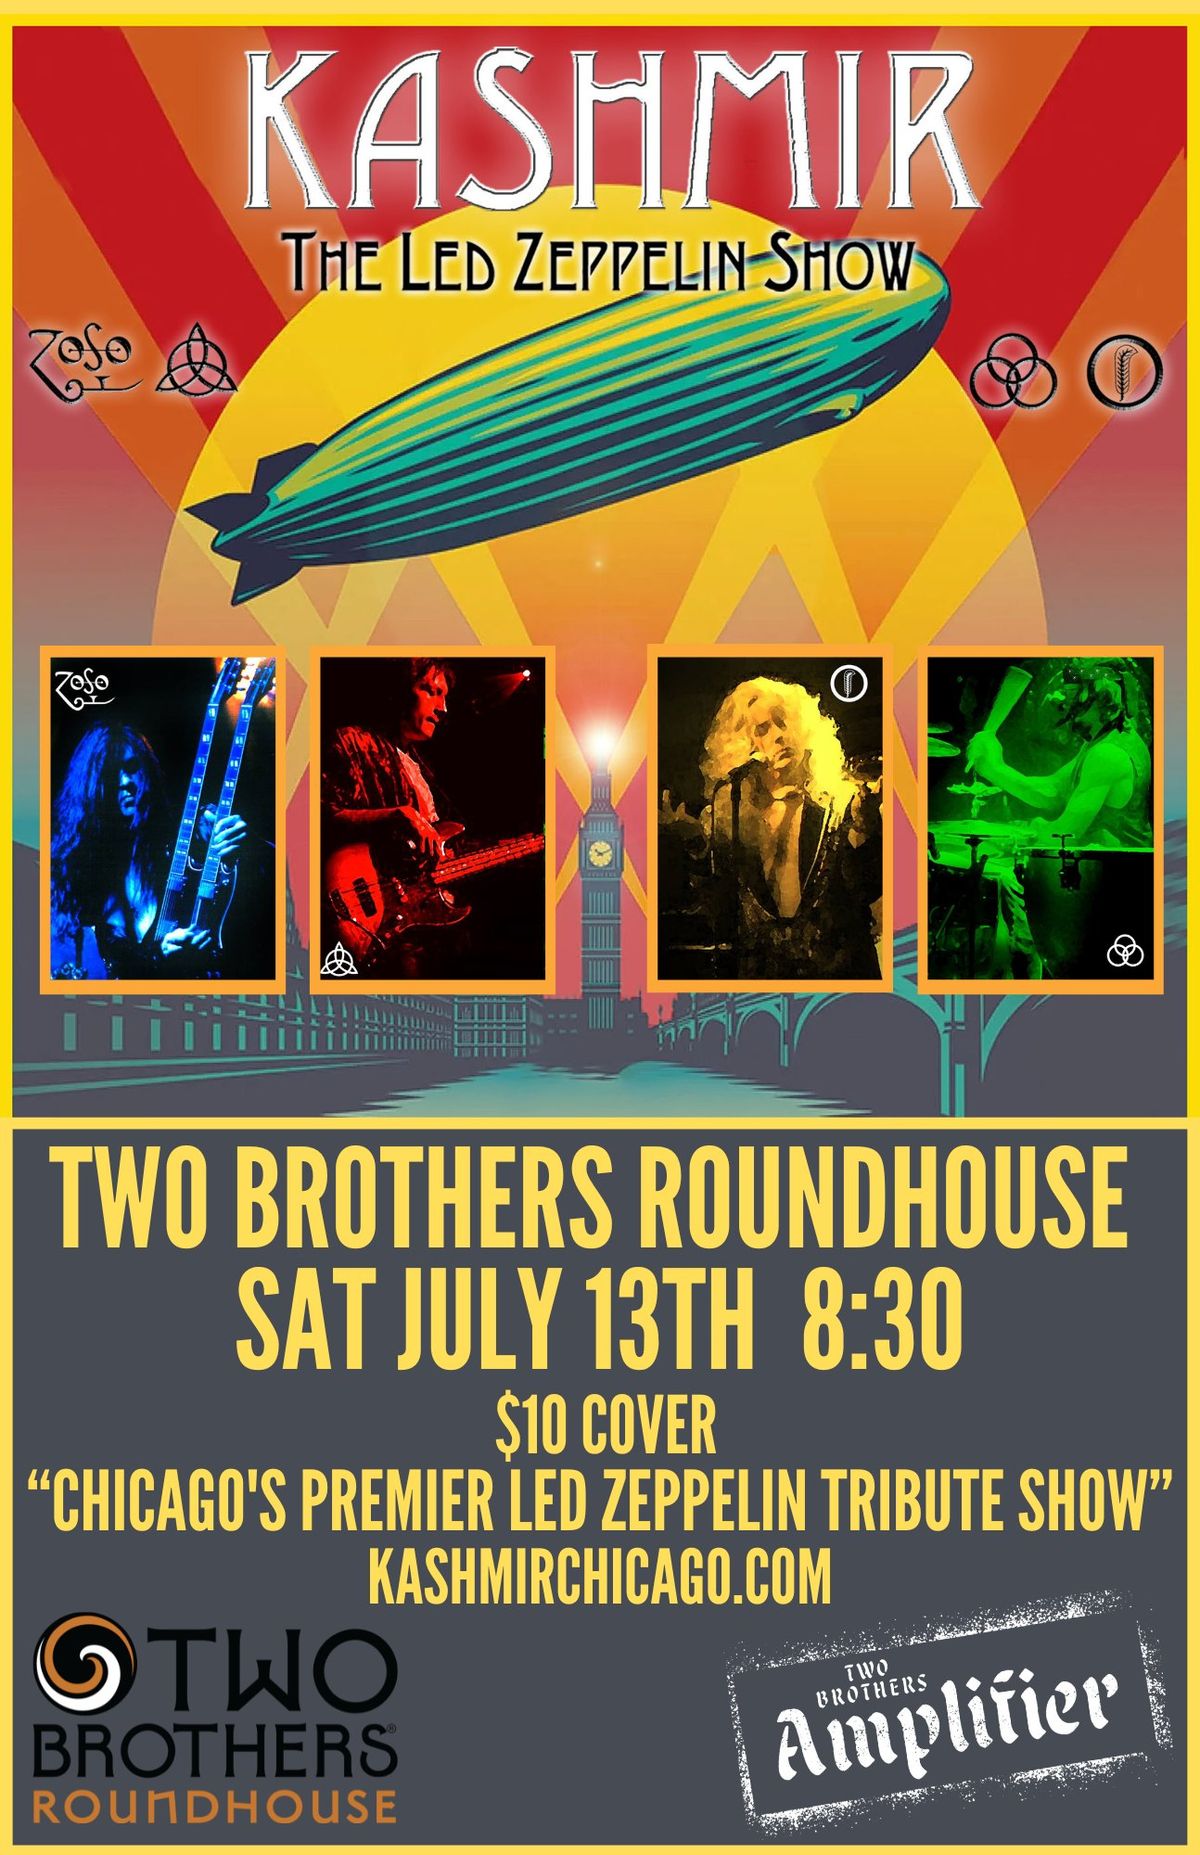 Kashmir - Chicago's Premier Led Zeppelin Tribute! at Two Brothers Roundhouse